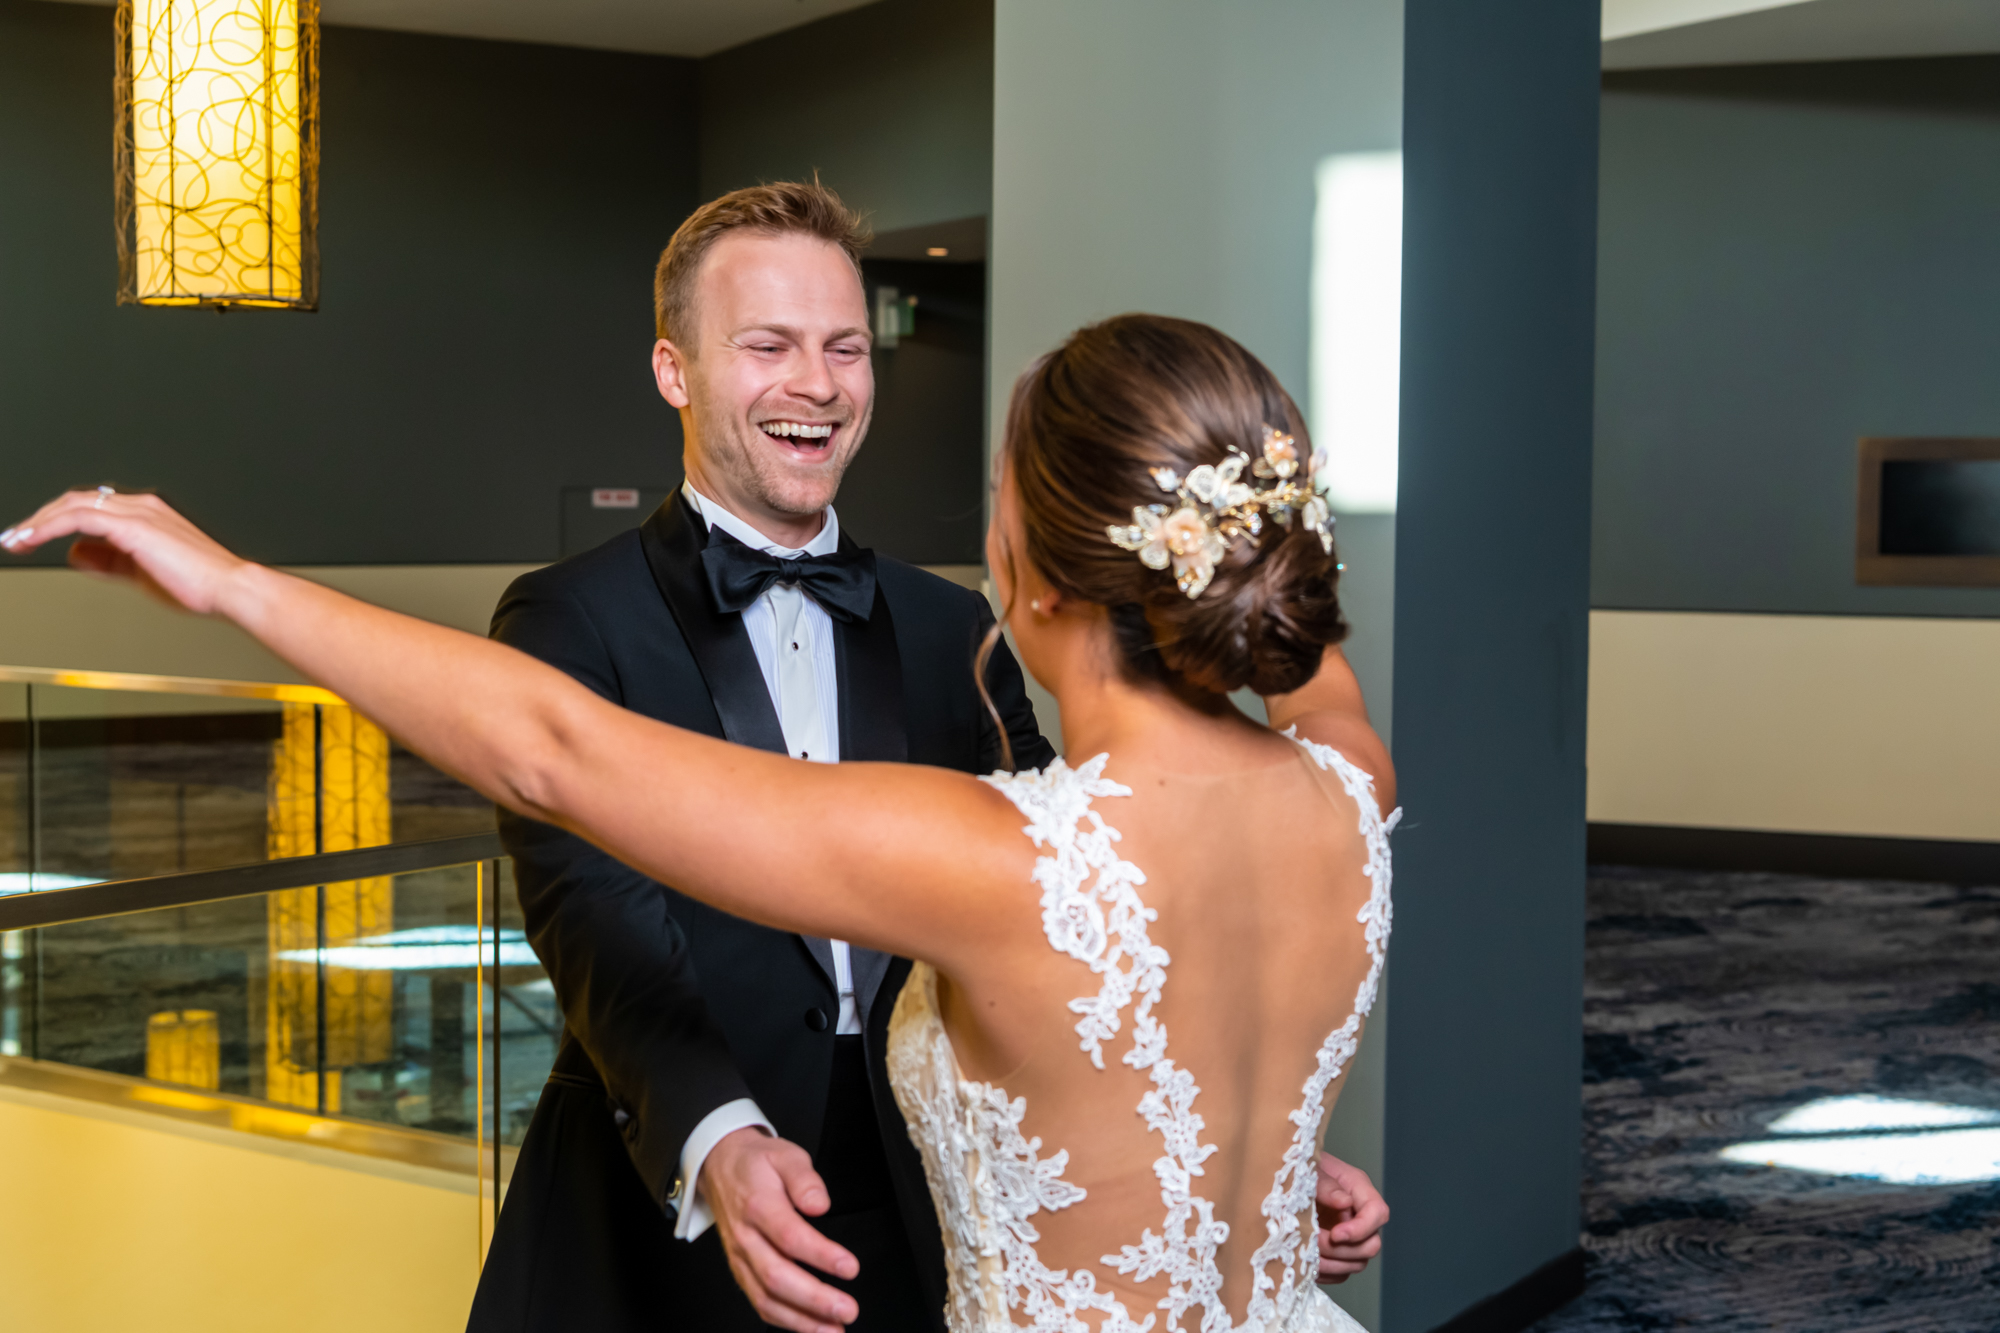 Groom smiles from ear to ear when seeing her bride for first time